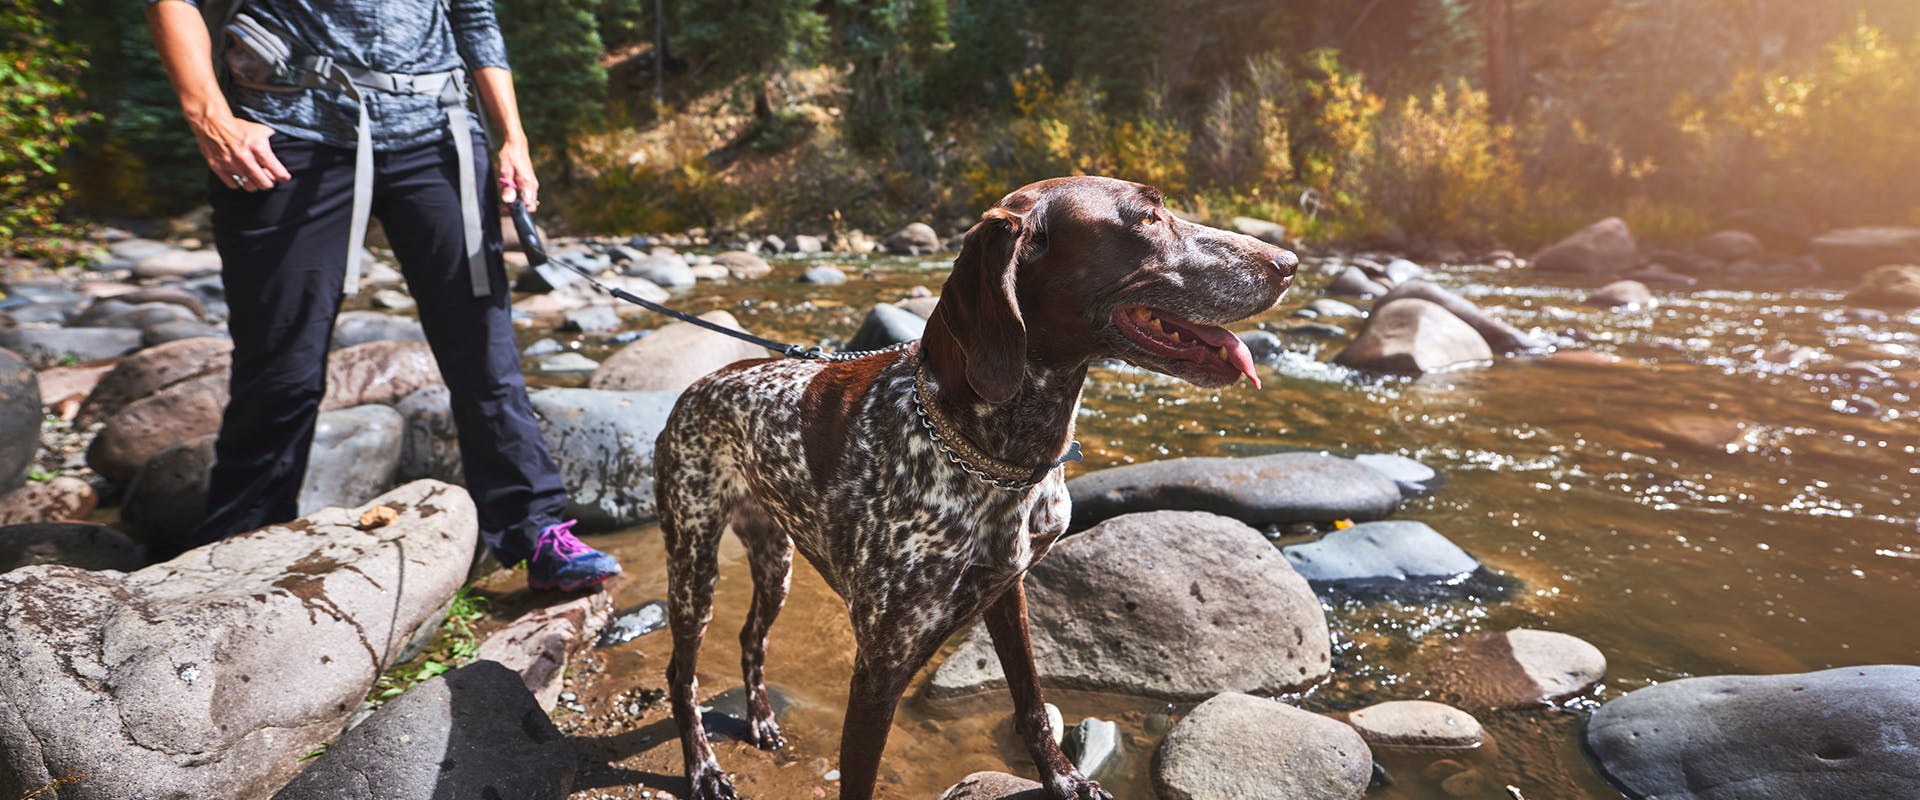 A dog and its owner hiking in the woods by a river